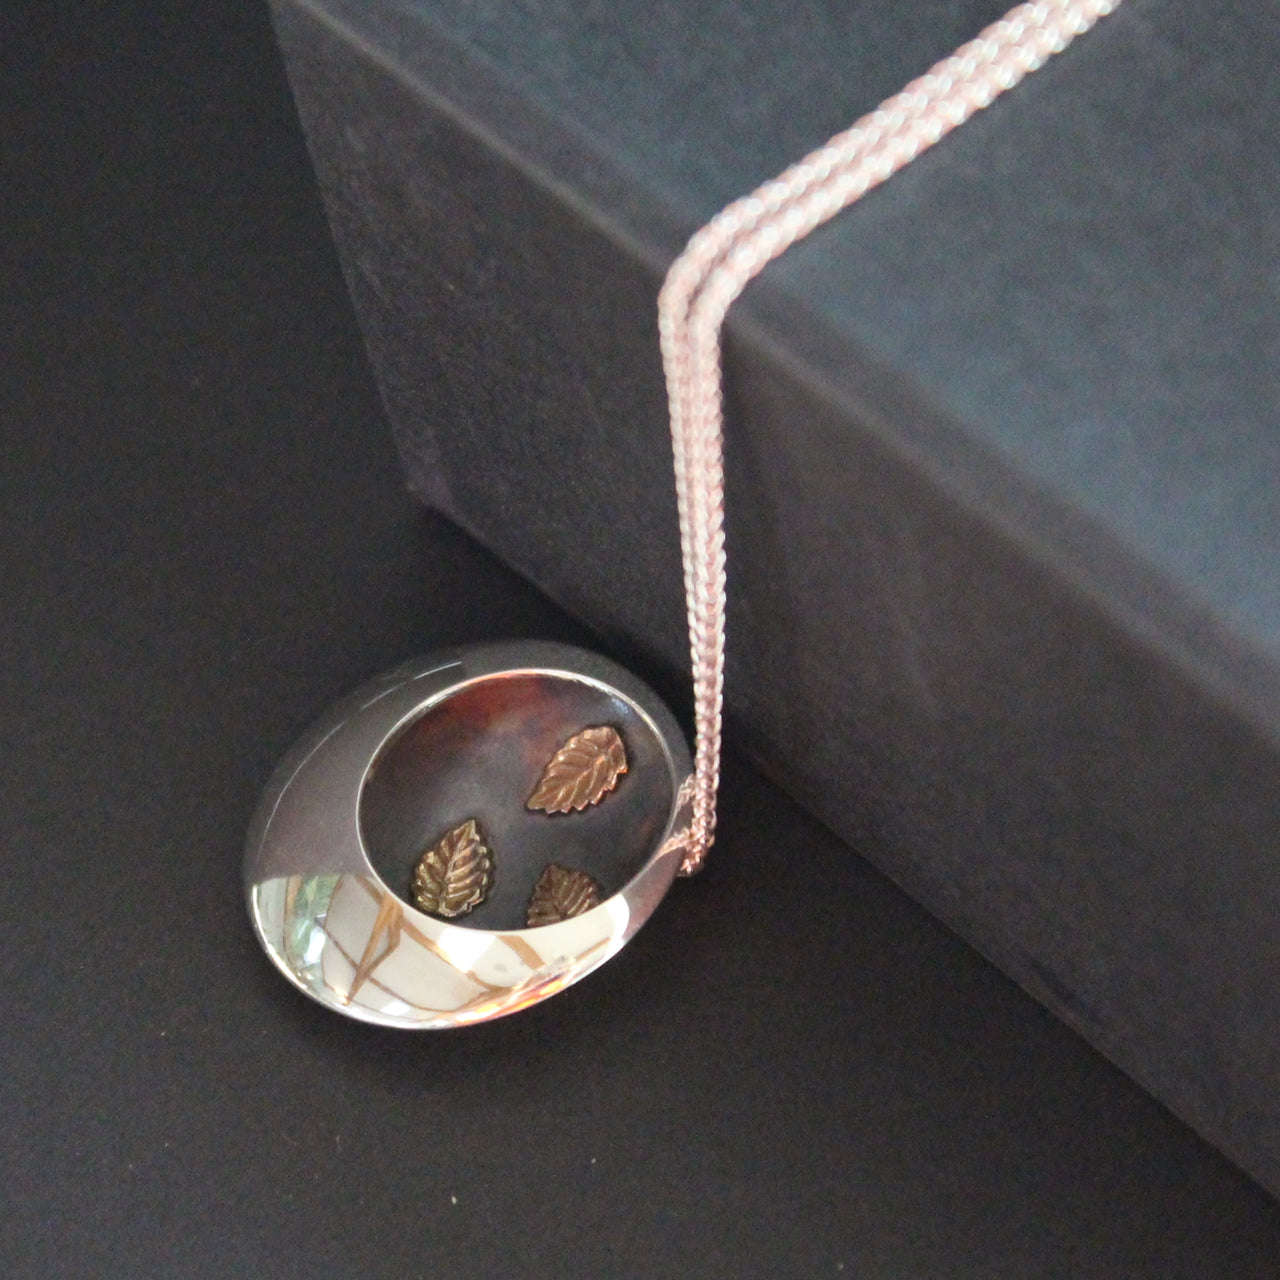 Silver round pendant with 3 inlayed leaves by UK artist Beverly Bartlett